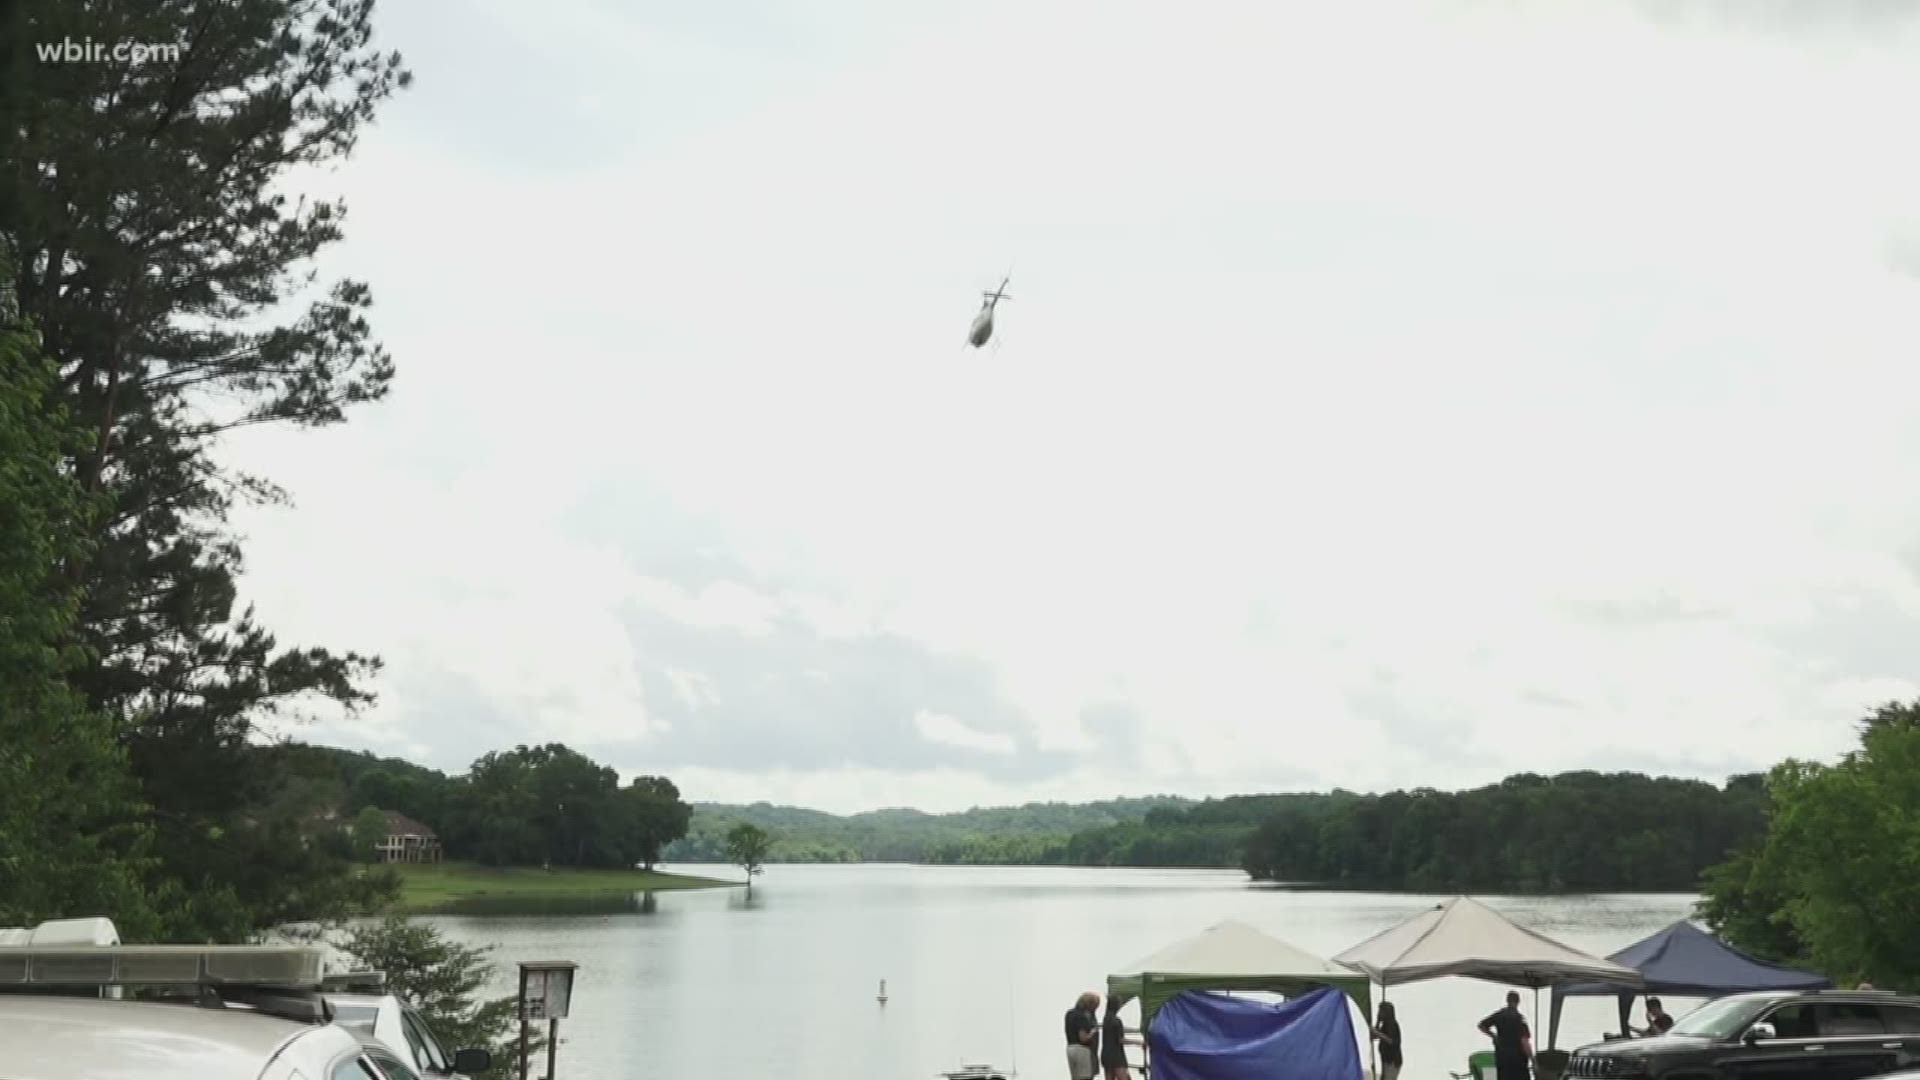 The active search for a Maryland swimmer who disappeared in Tellico lake is over.